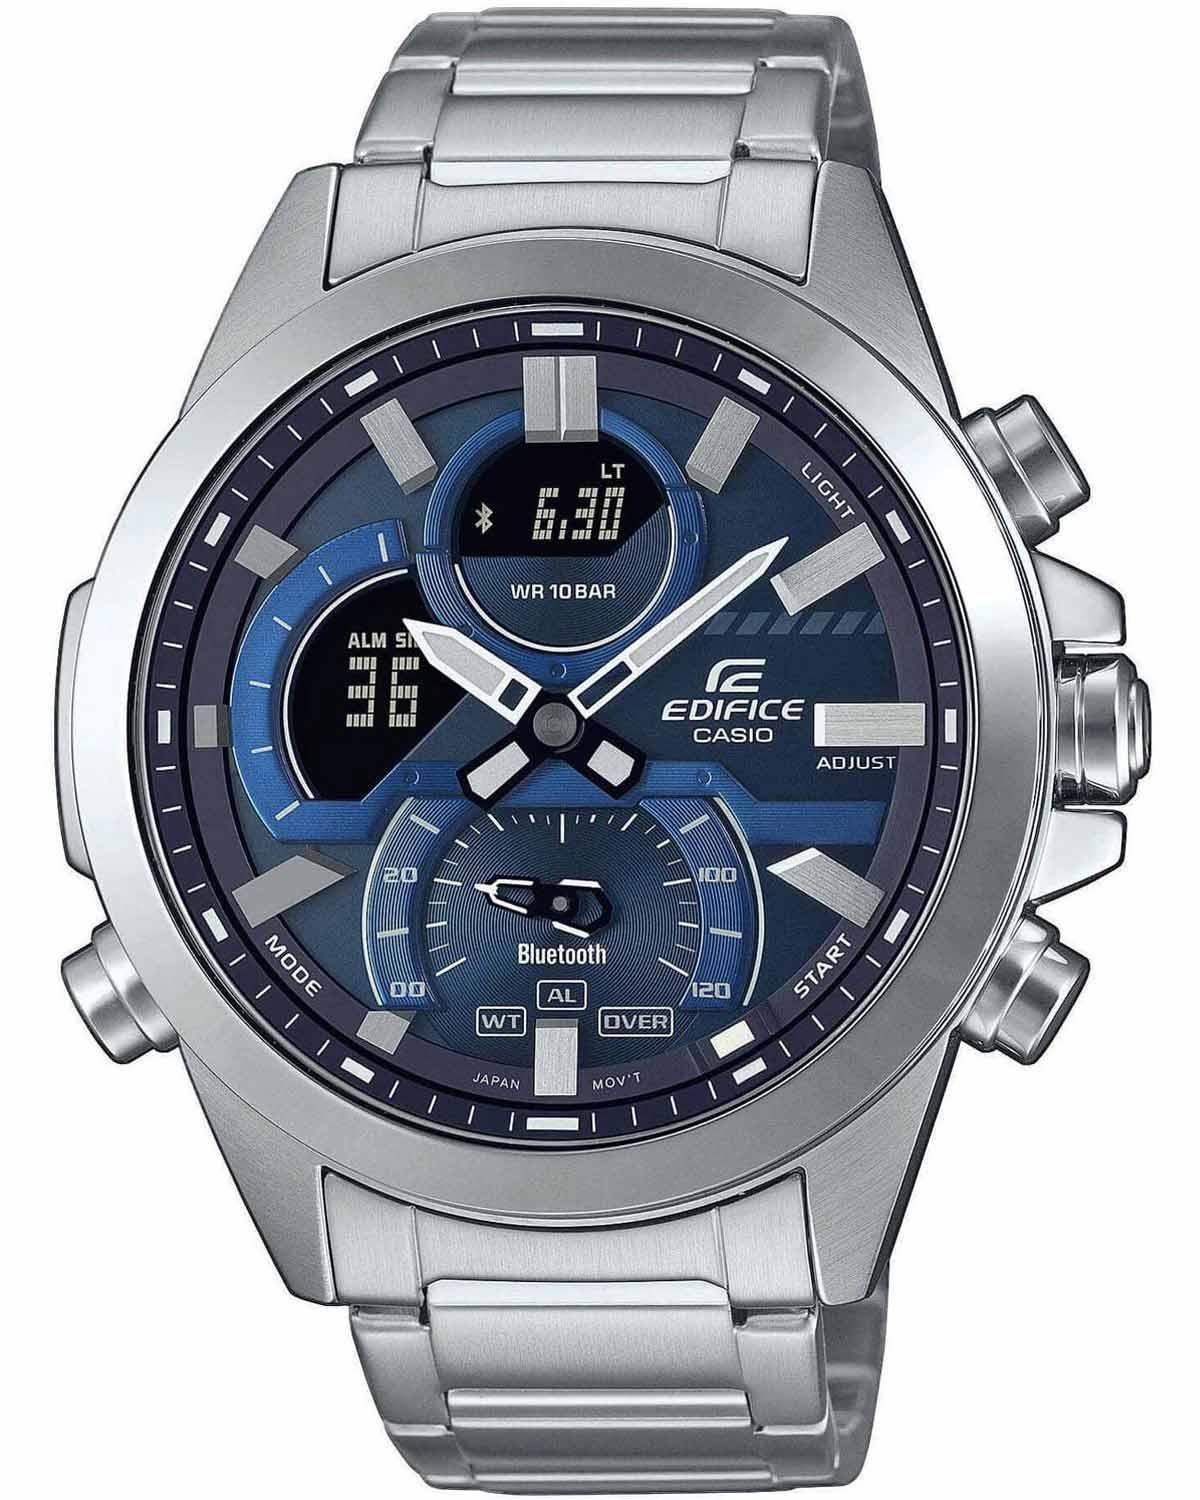 CASIO Edifice Smartwatch Bluetooth Chronograph - ECB-30D-2AEF, Silver case with Stainless Steel Bracelet